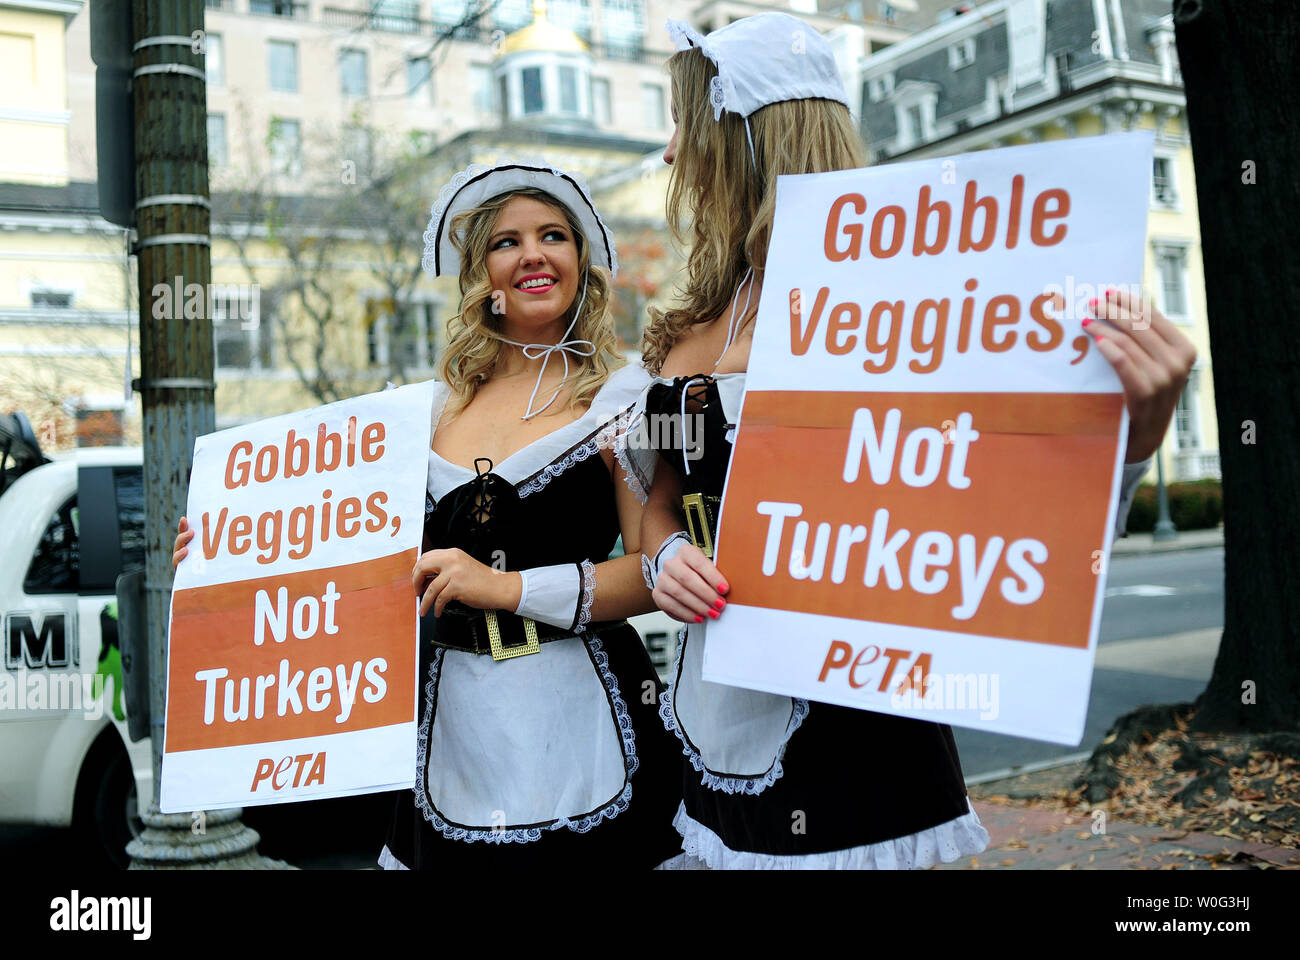 PETA activists Laura Chamberlin (L) and Monika Meilleur promote the eating of Tofurky, a tofu substitute to turkey, for Thanksgiving in front of the White House in Washington on November 23, 2010.   UPI/Kevin Dietsch Stock Photo